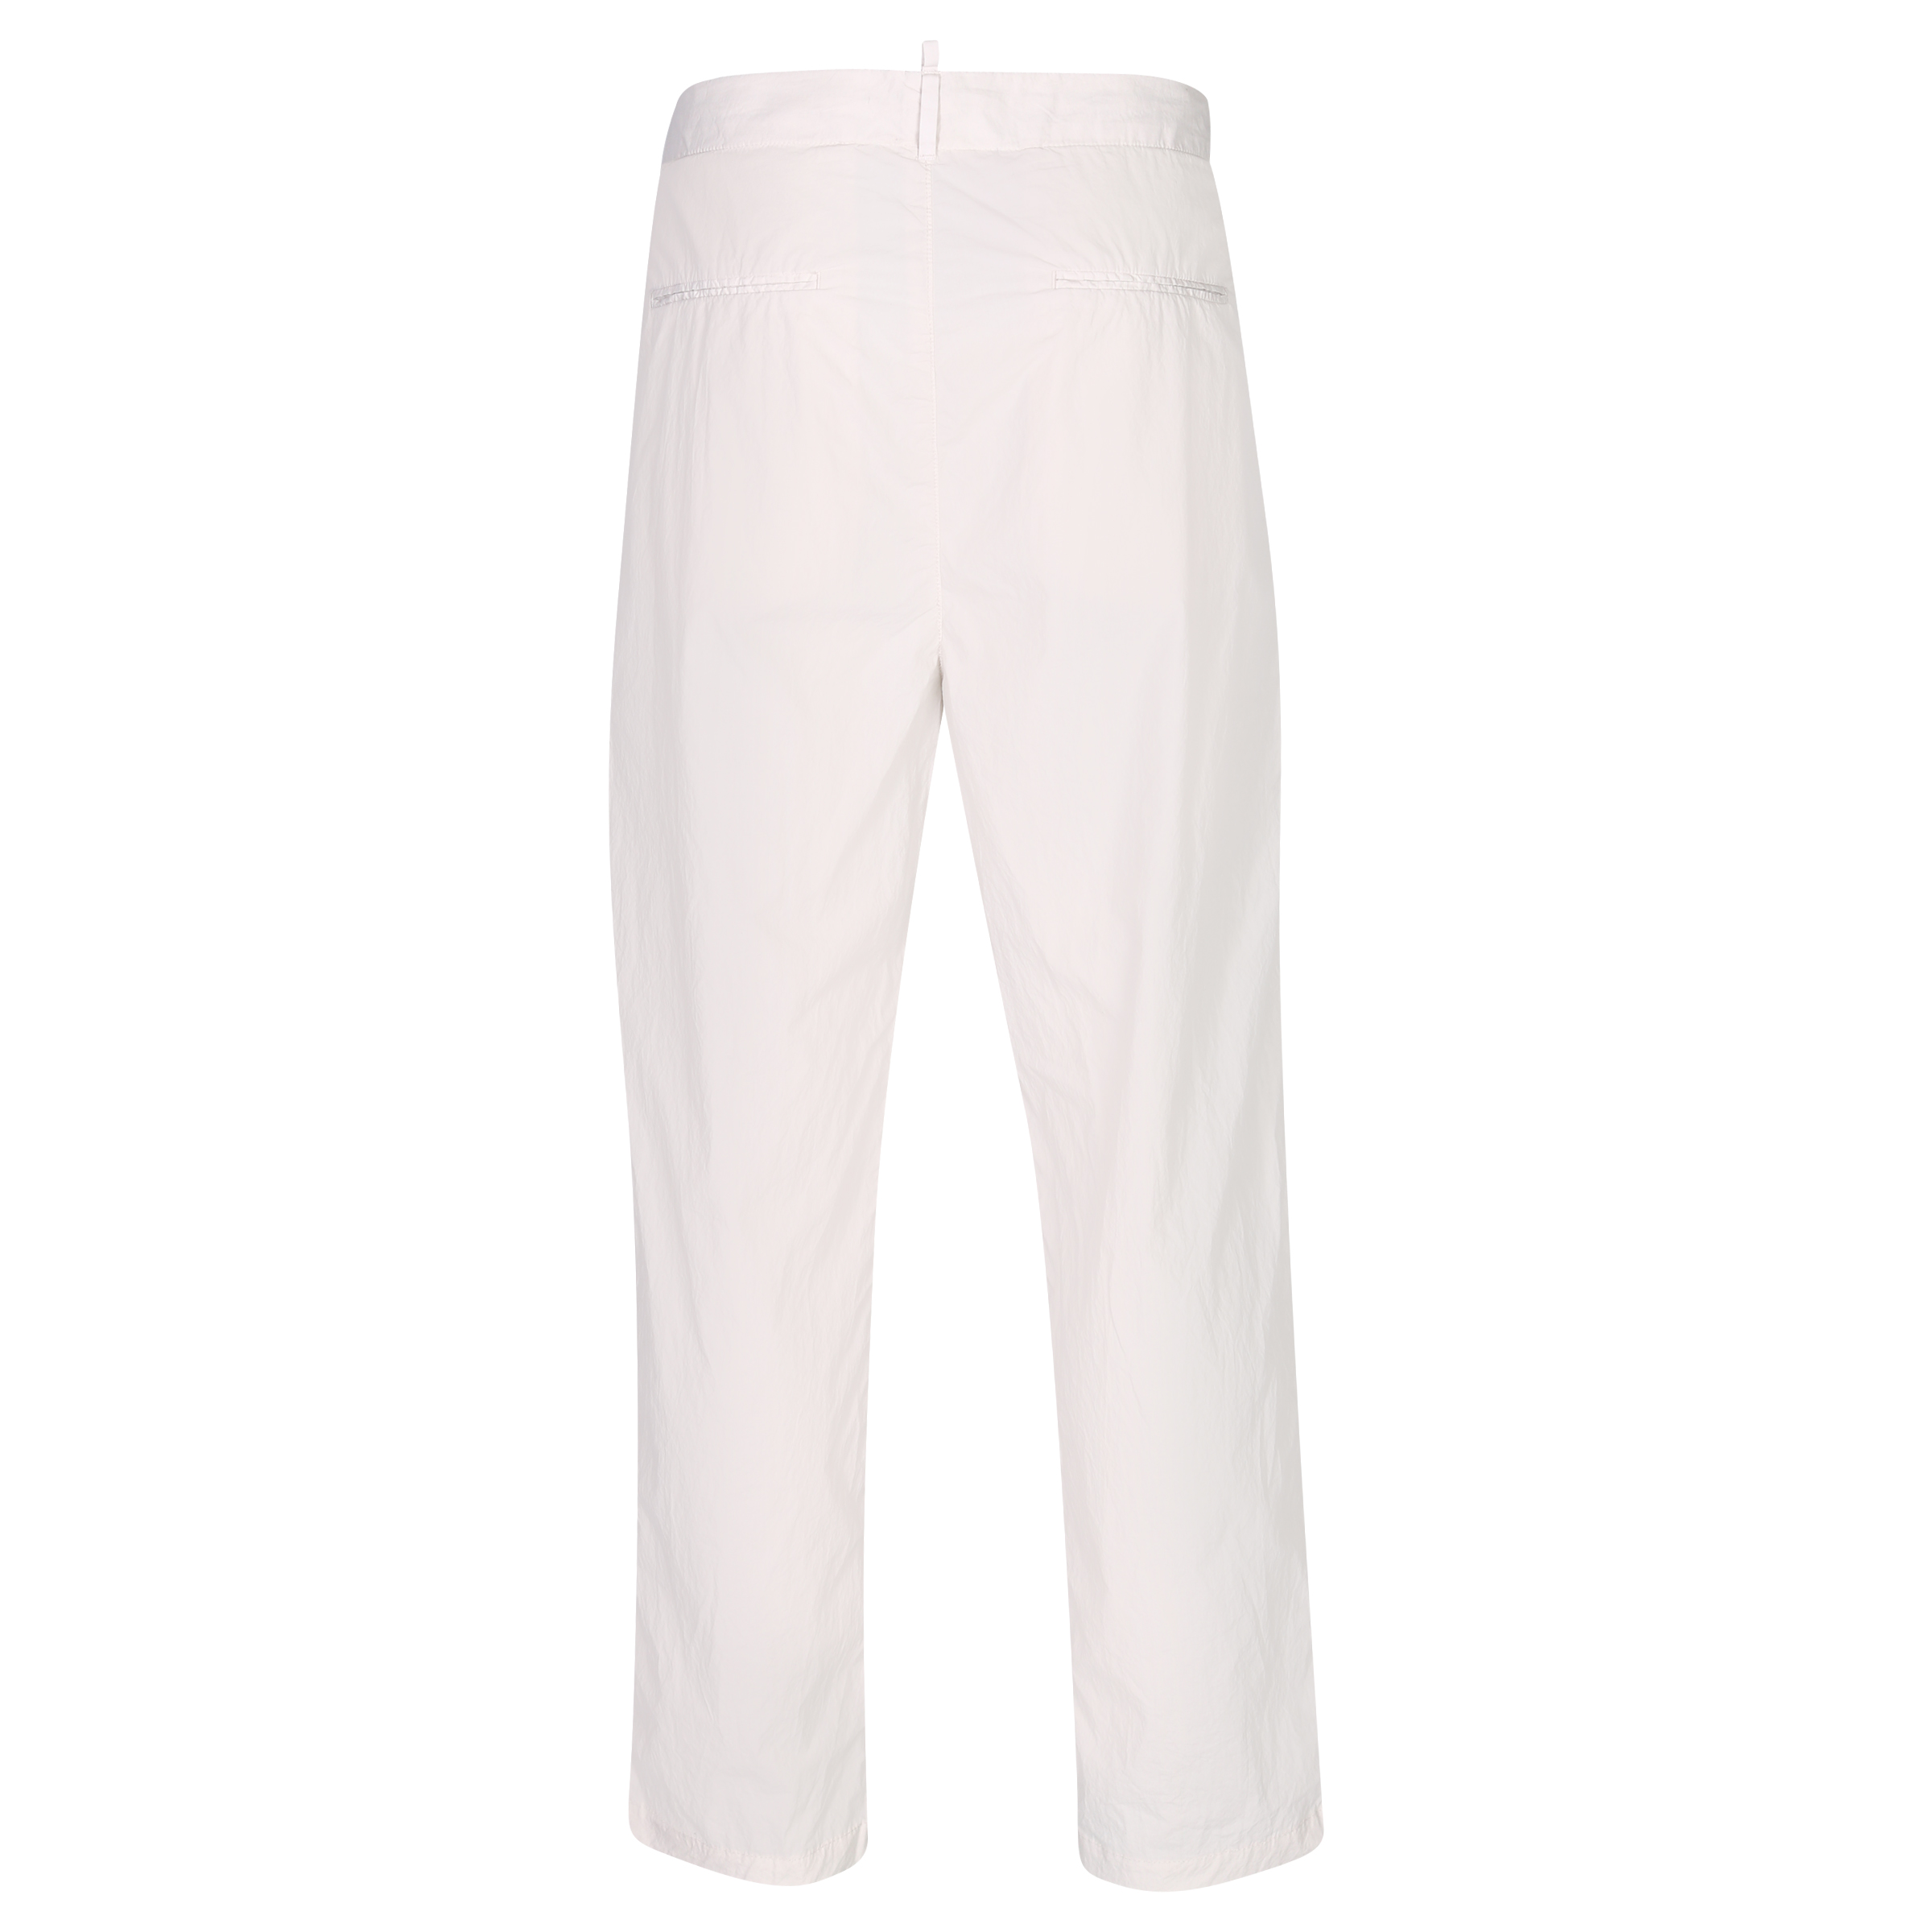 Hannes Roether Trousers in Risotto